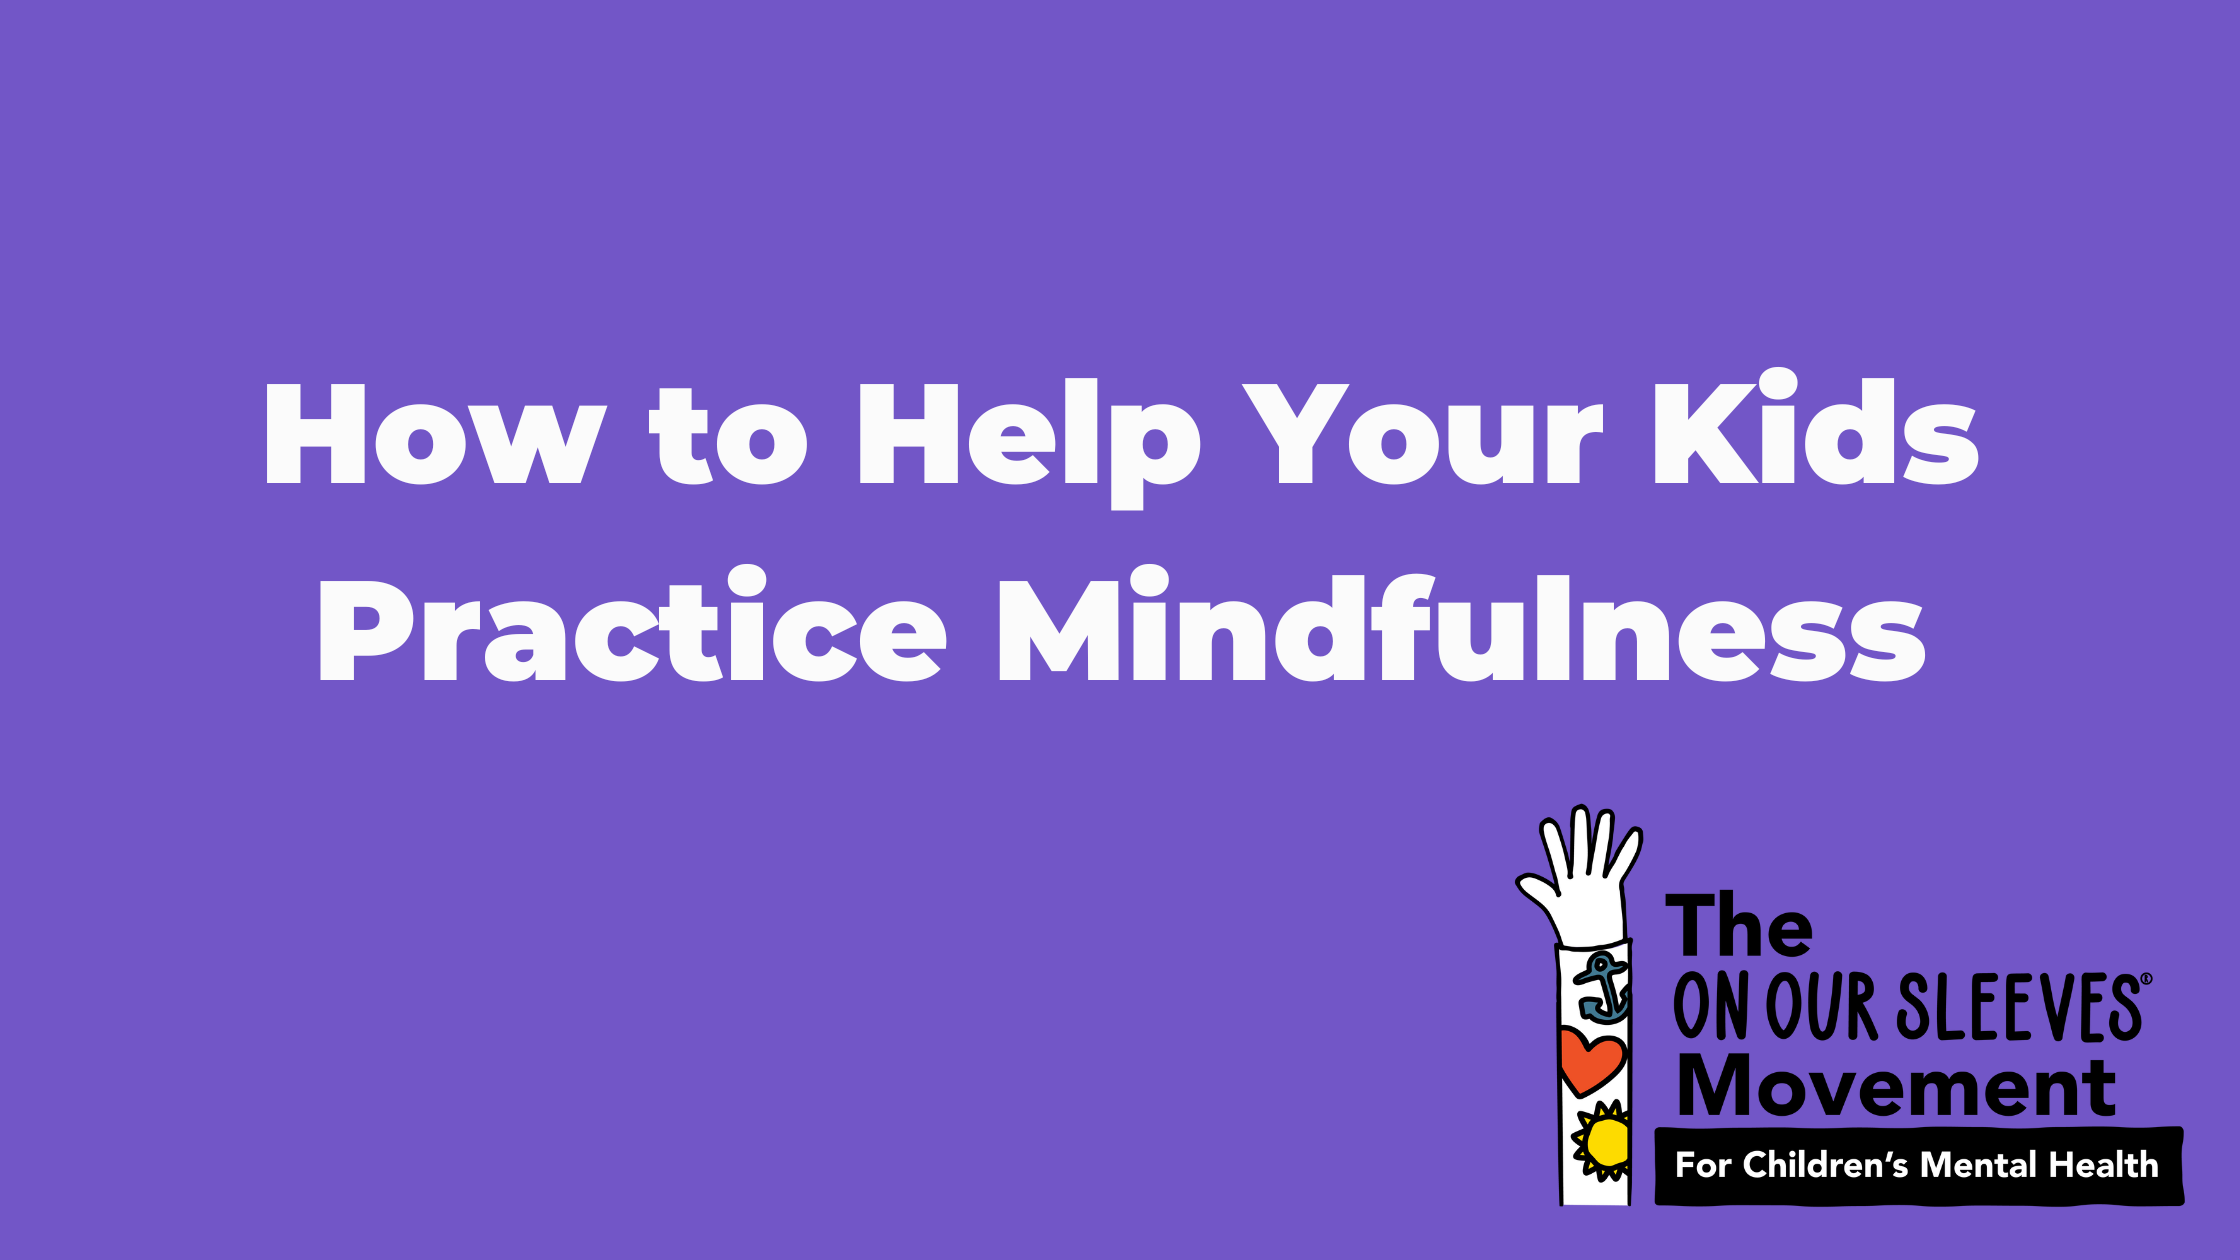 How to Help Your Kids Practice Mindfulness